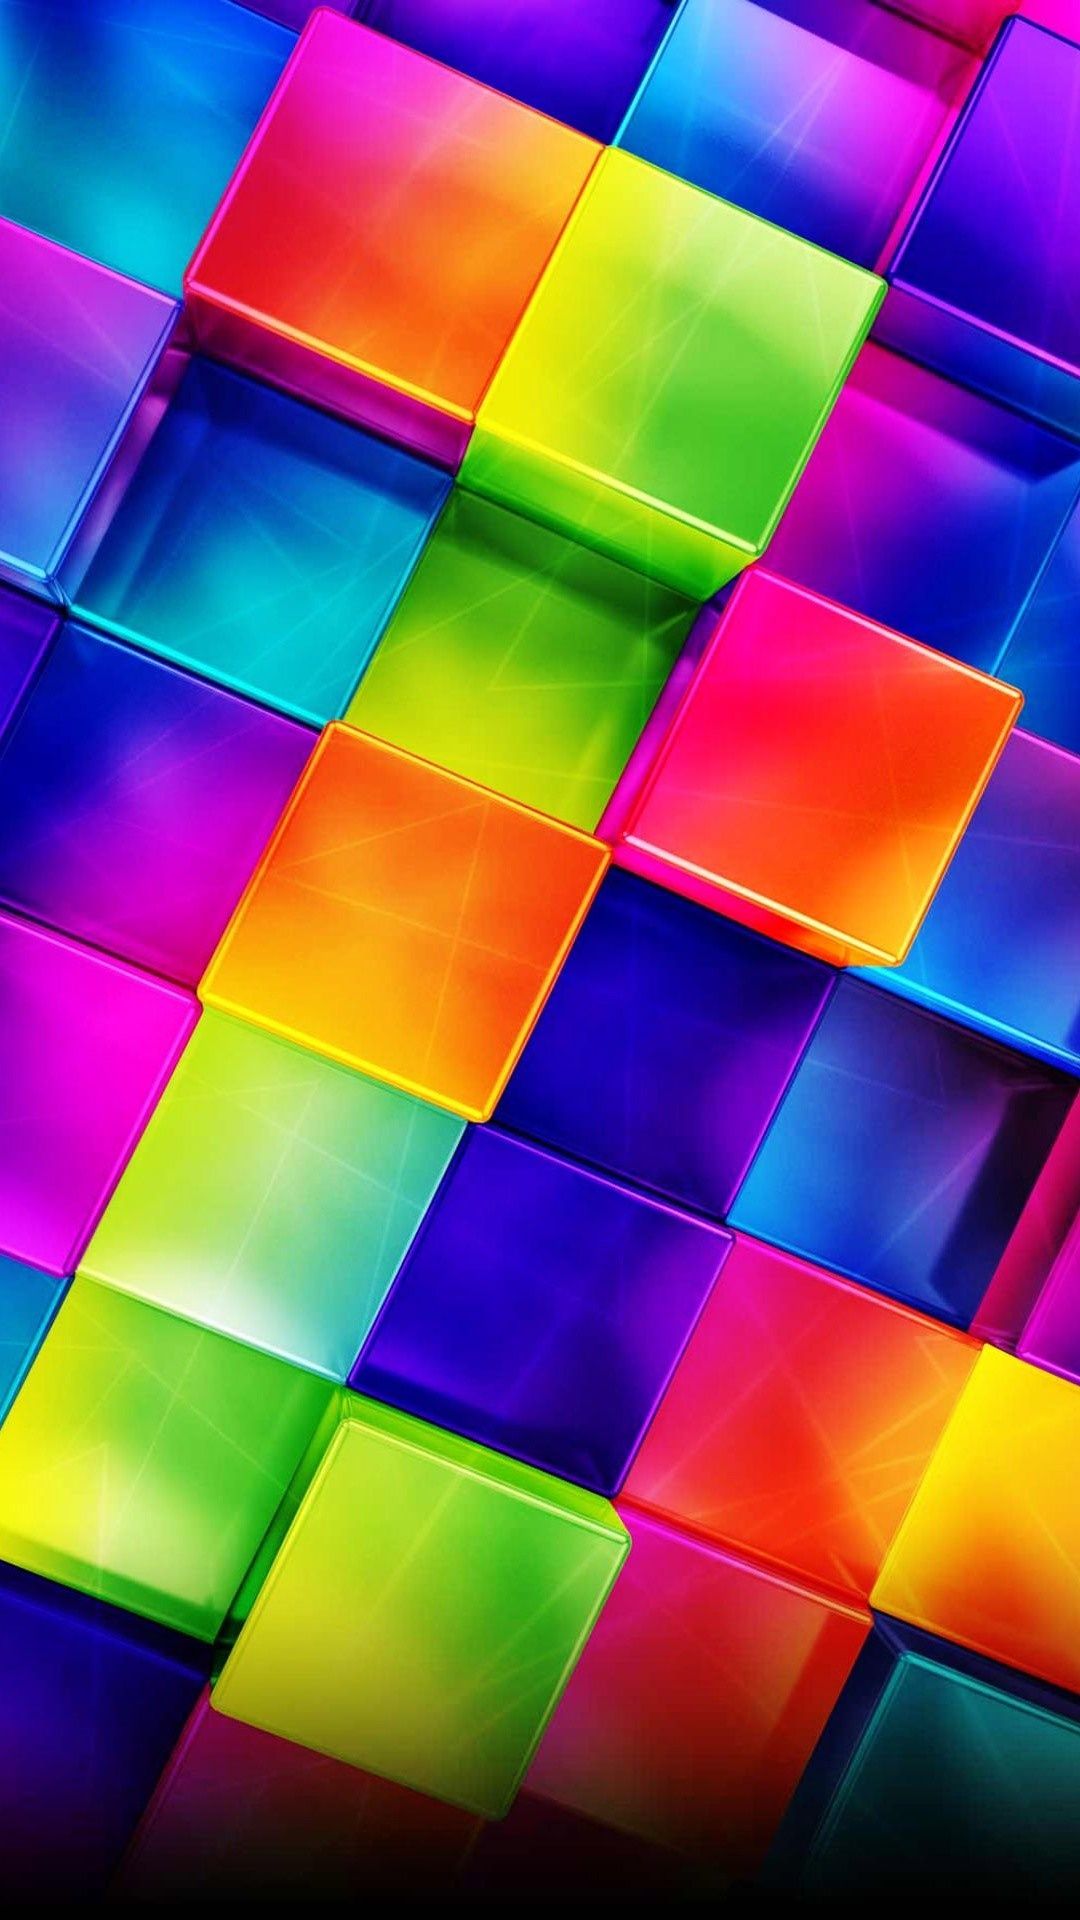 3d Geometric Colorful Android Wallpaper - Just Dance 2014 Background -  1080x1920 Wallpaper 